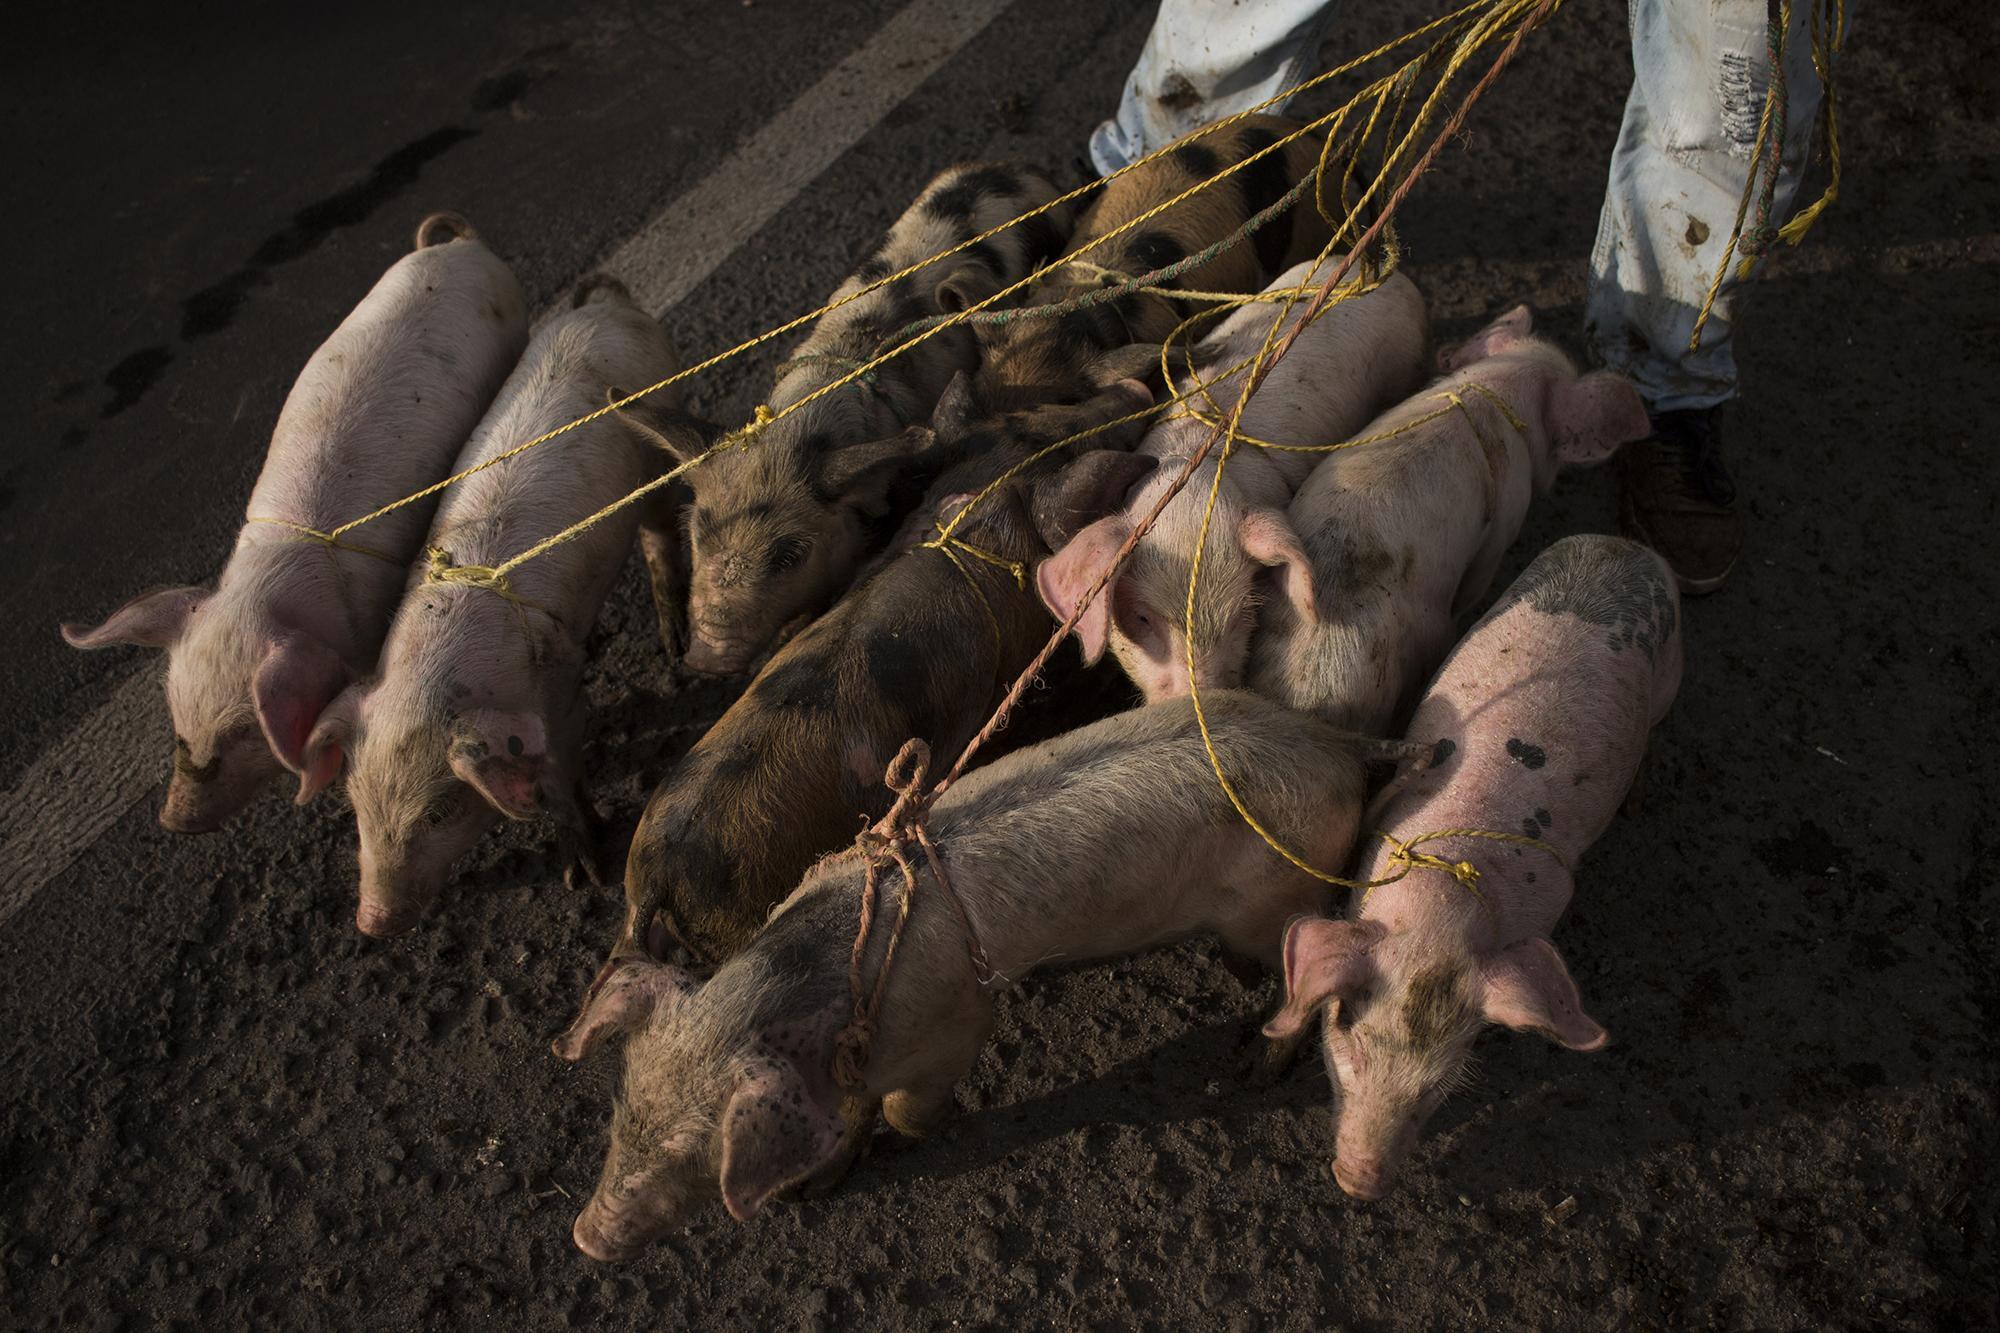 A trader moves a litter of pigs that he bought in the tiangue. He paid $20 for each one and he will try to profit $5 for each after reselling them at other tiangues throughout the week in the municipalities of El Tránsito and Nueva Guadalupe in the San Miguel department; Aguilares, in the San Salvador department; Ilobasco, Cabañas department; and Santiago Nonualco, La Paz department.